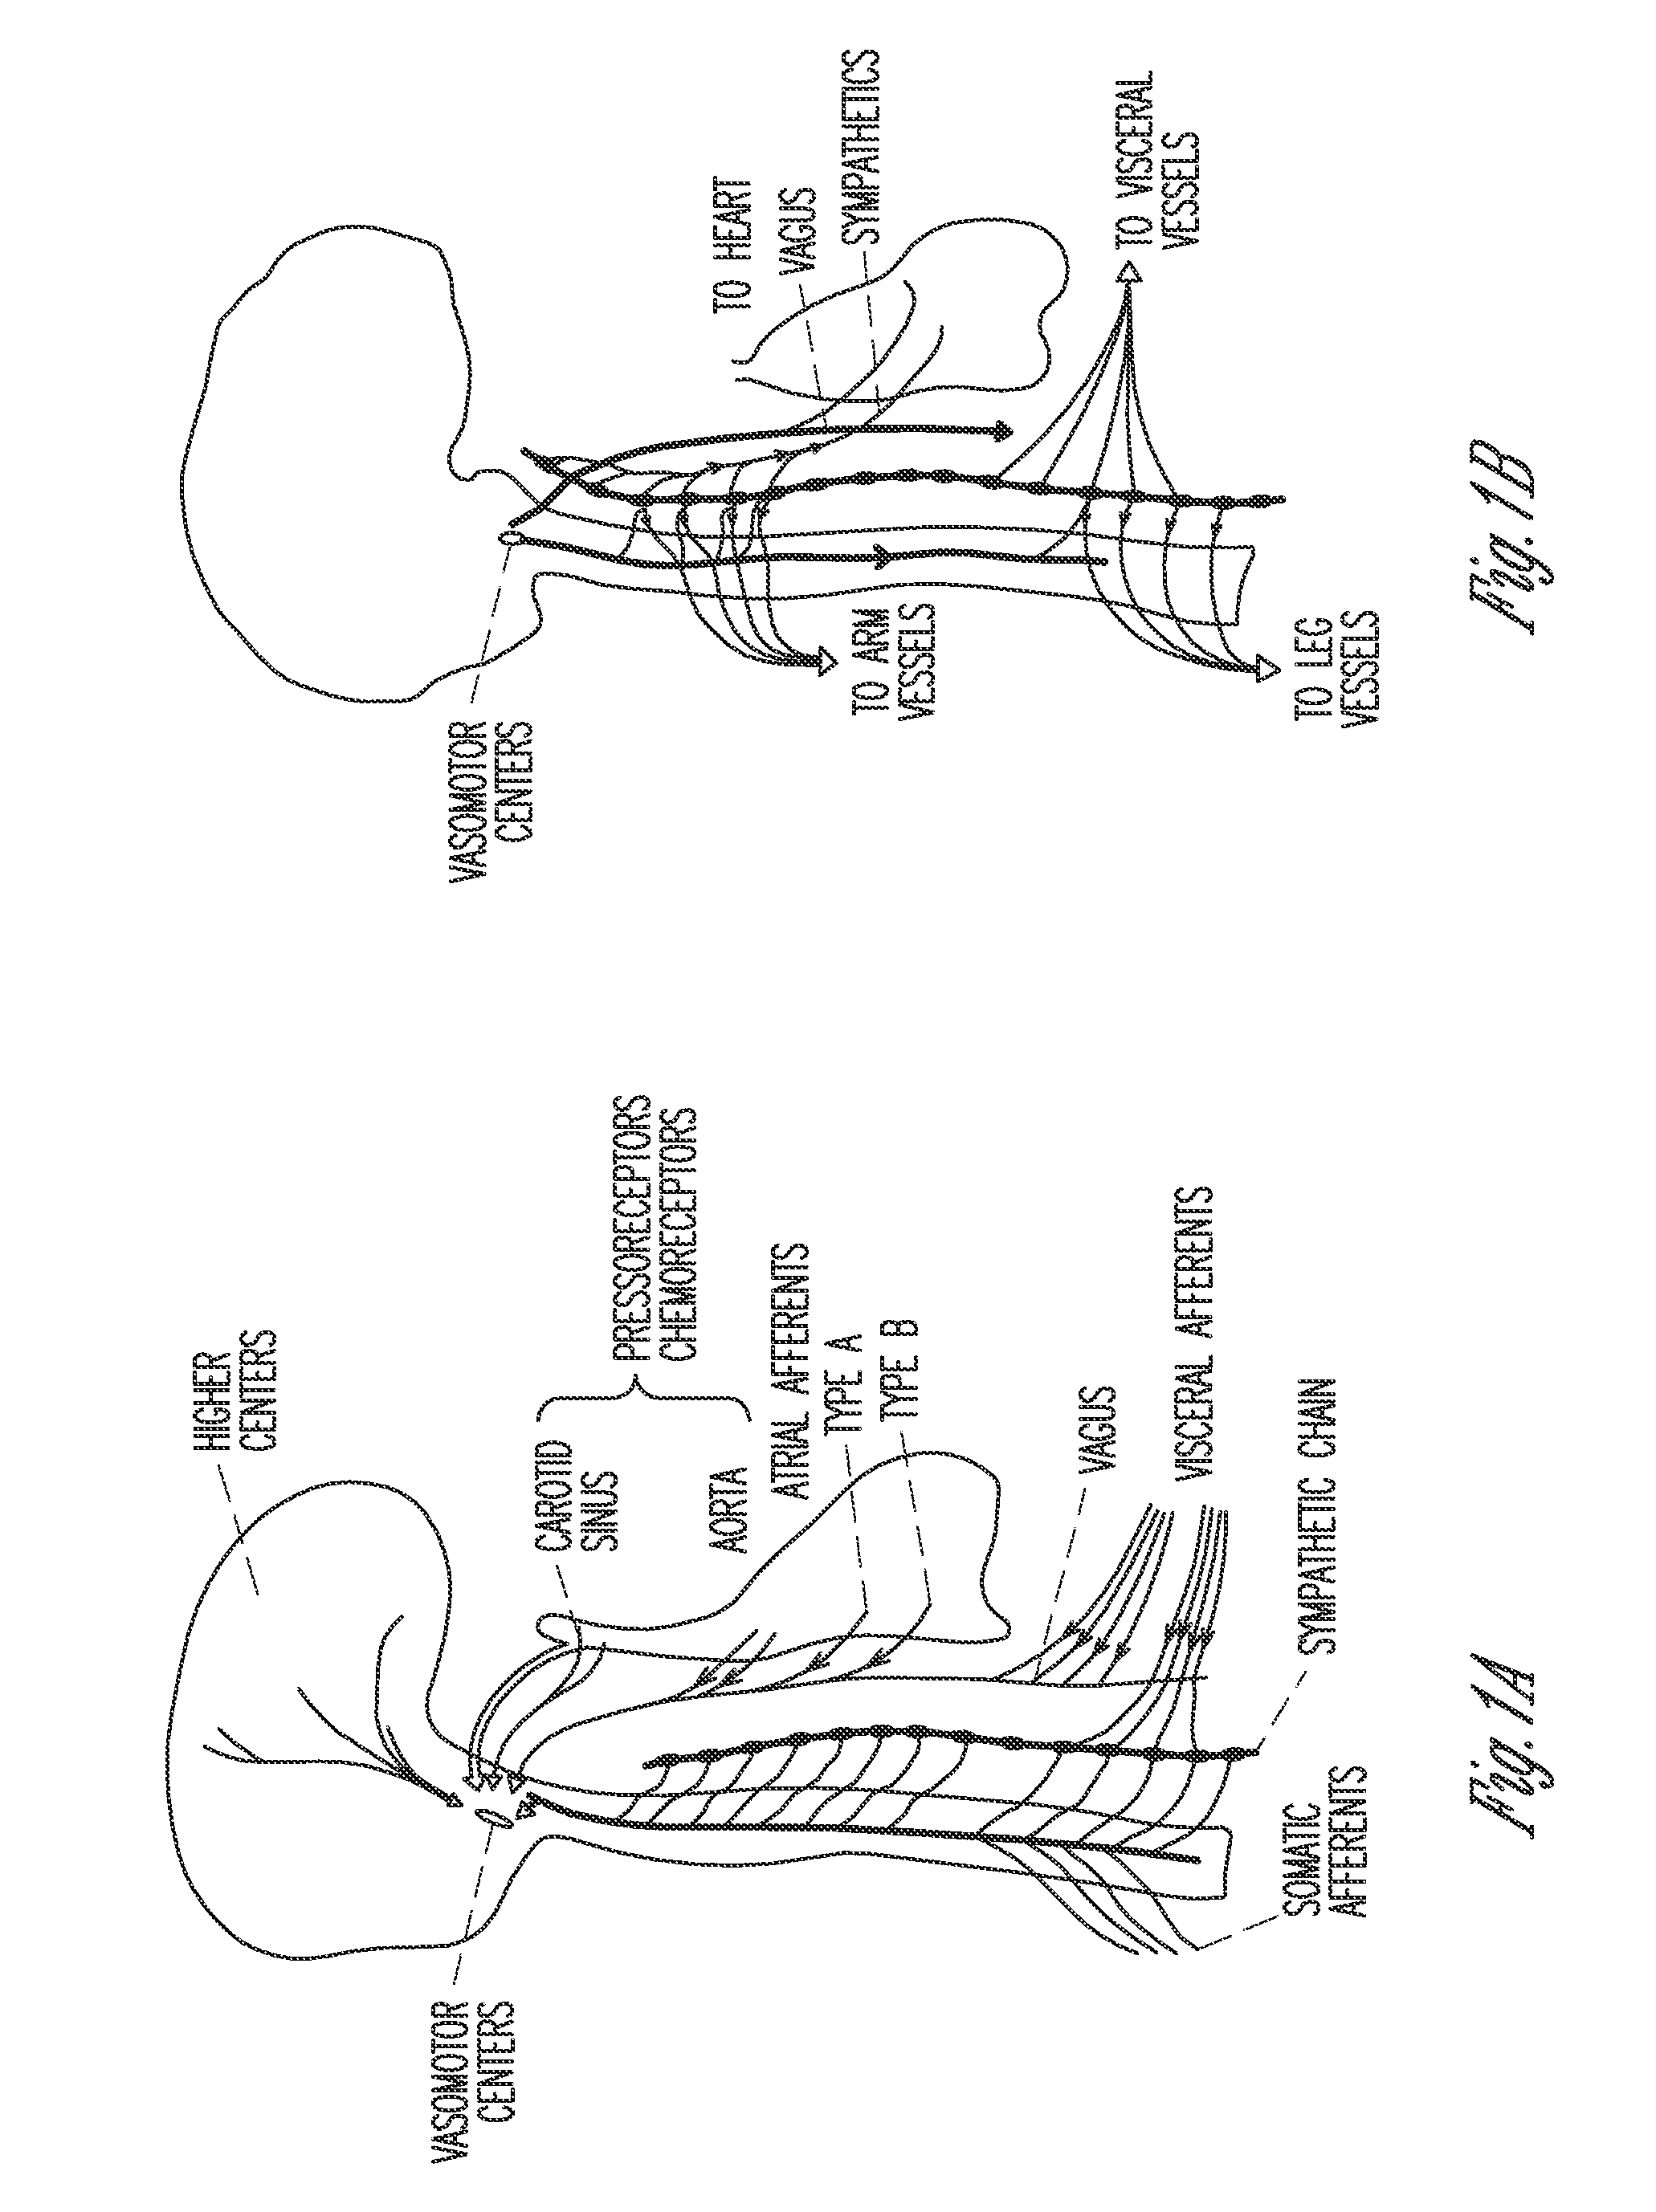 System and method for sustained baroreflex stimulation